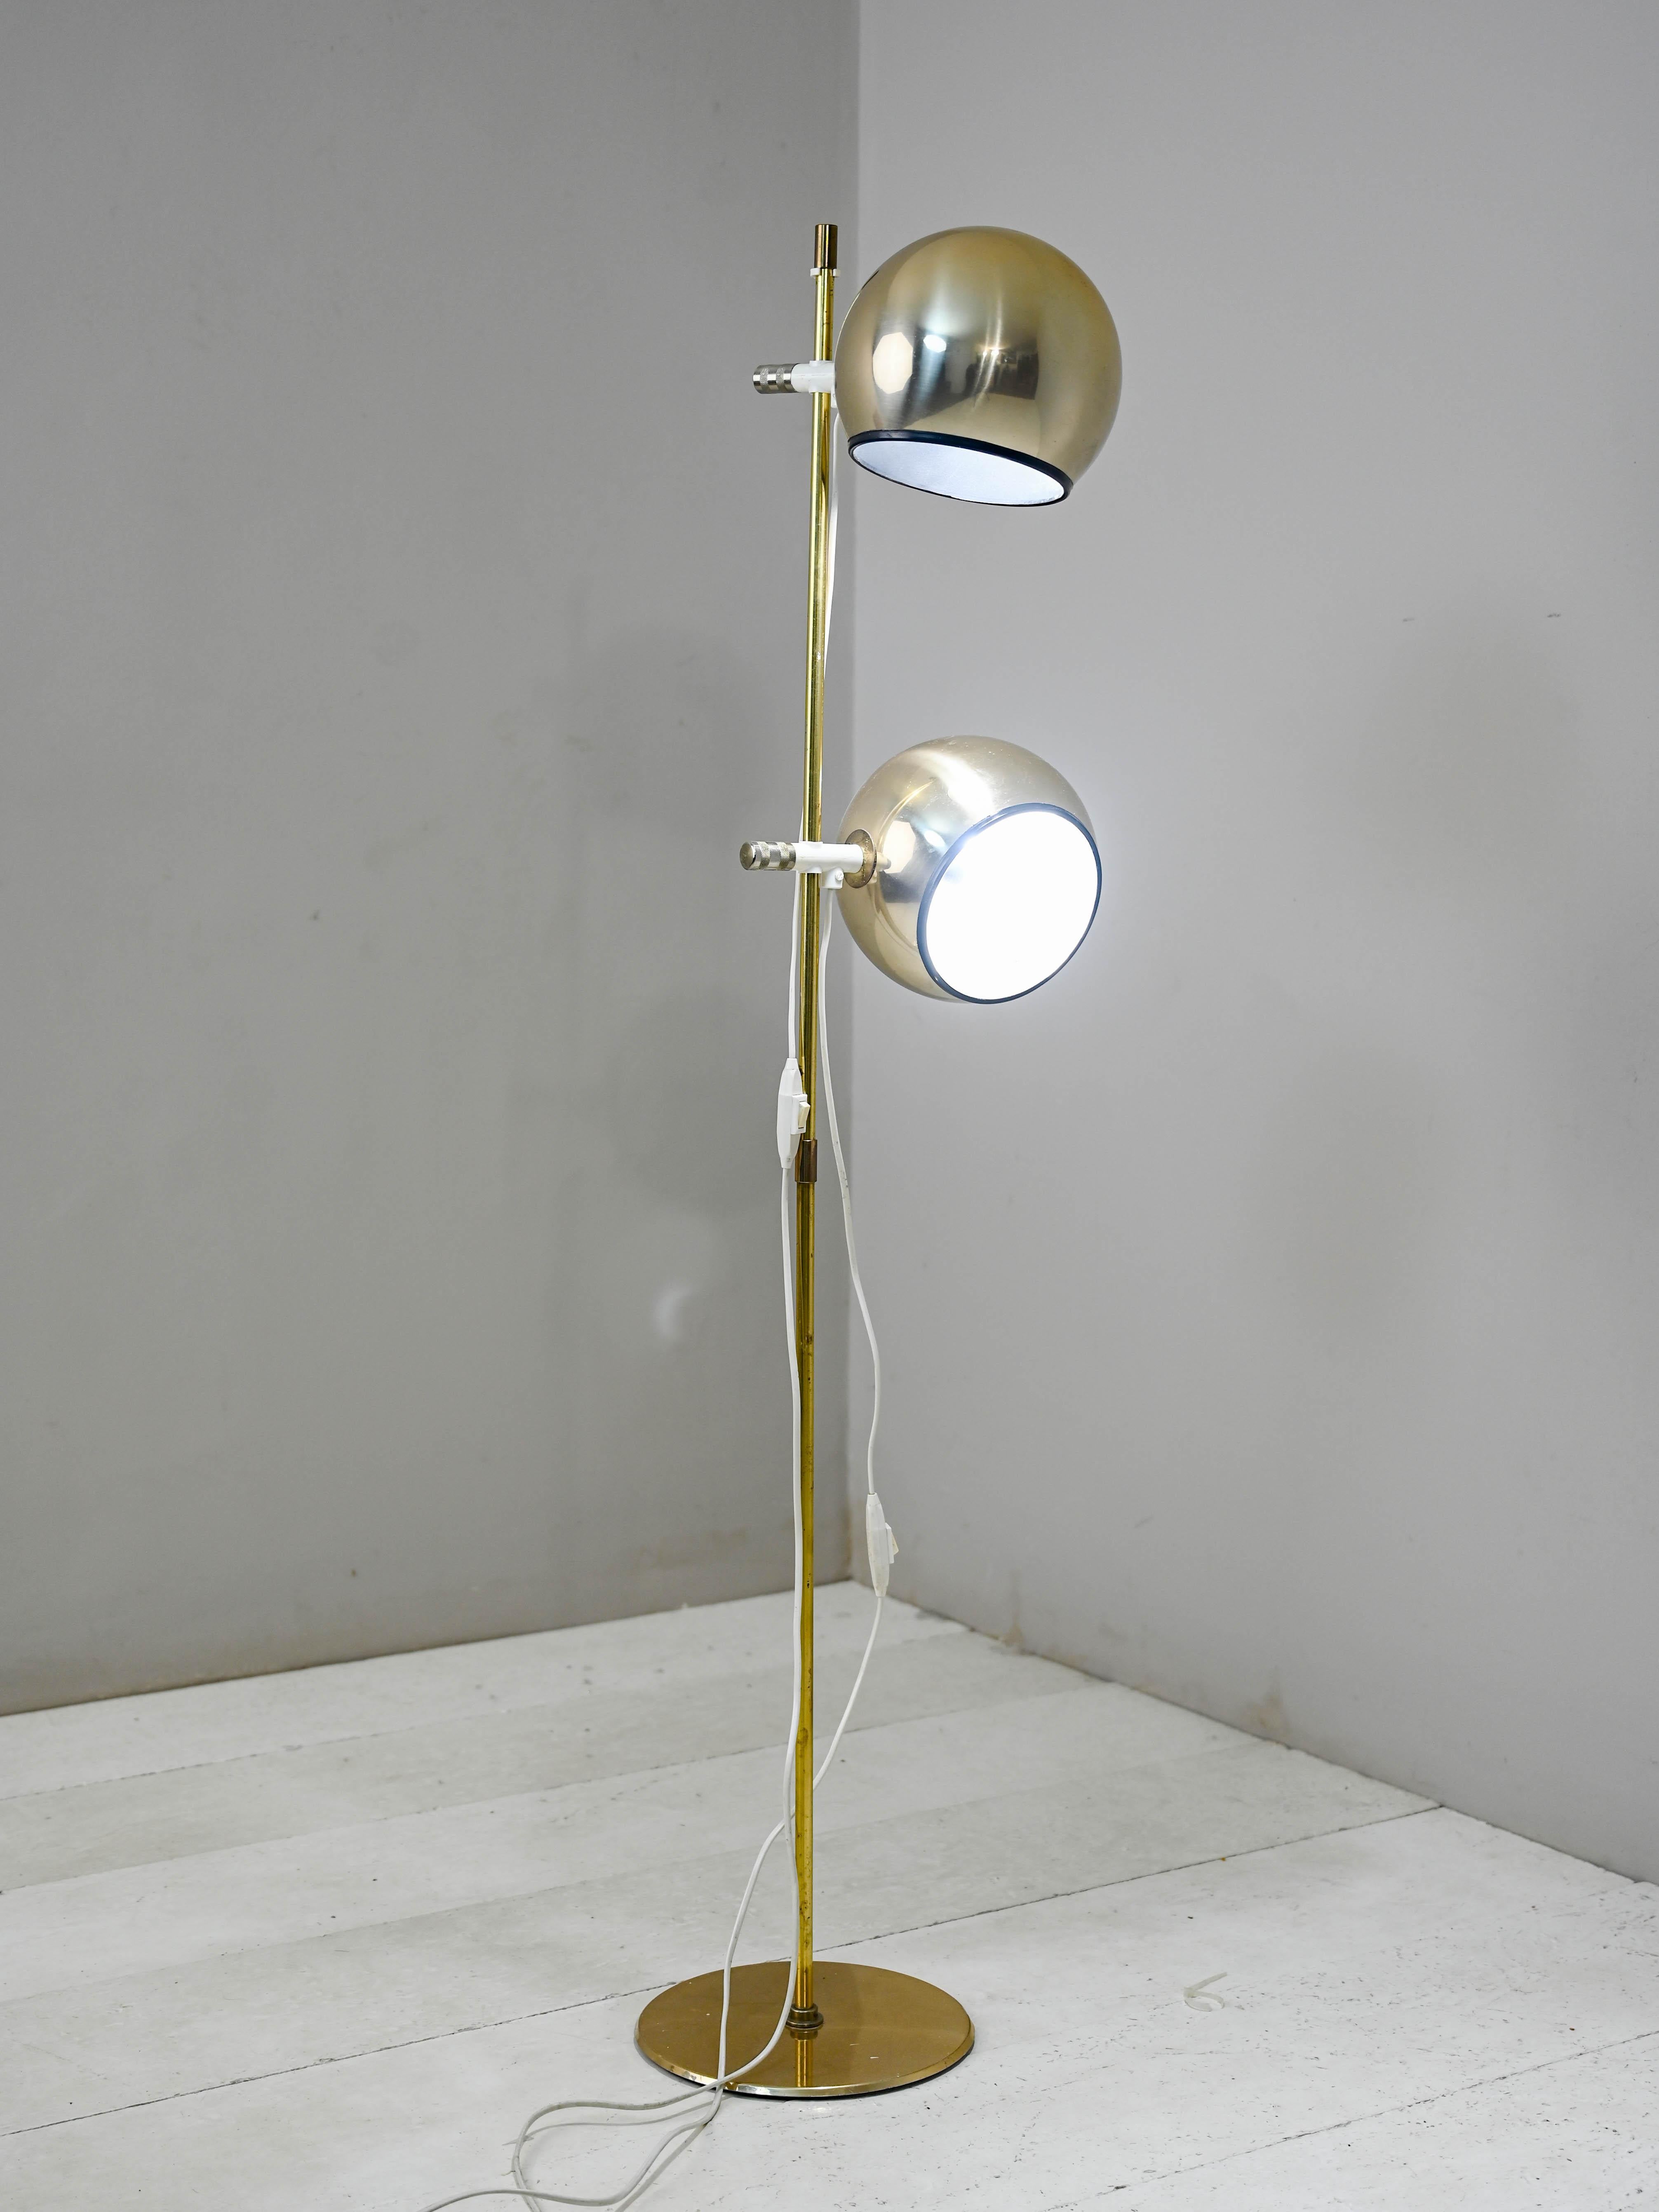 Vintage floor lamp with double adjustable lampshade.

Made in Sweden this lamp consists of two spherical metal lampshades that can be swiveled and rotated.
The gilded metal frame gives it a look of timeless beauty.
Good condition.It may show